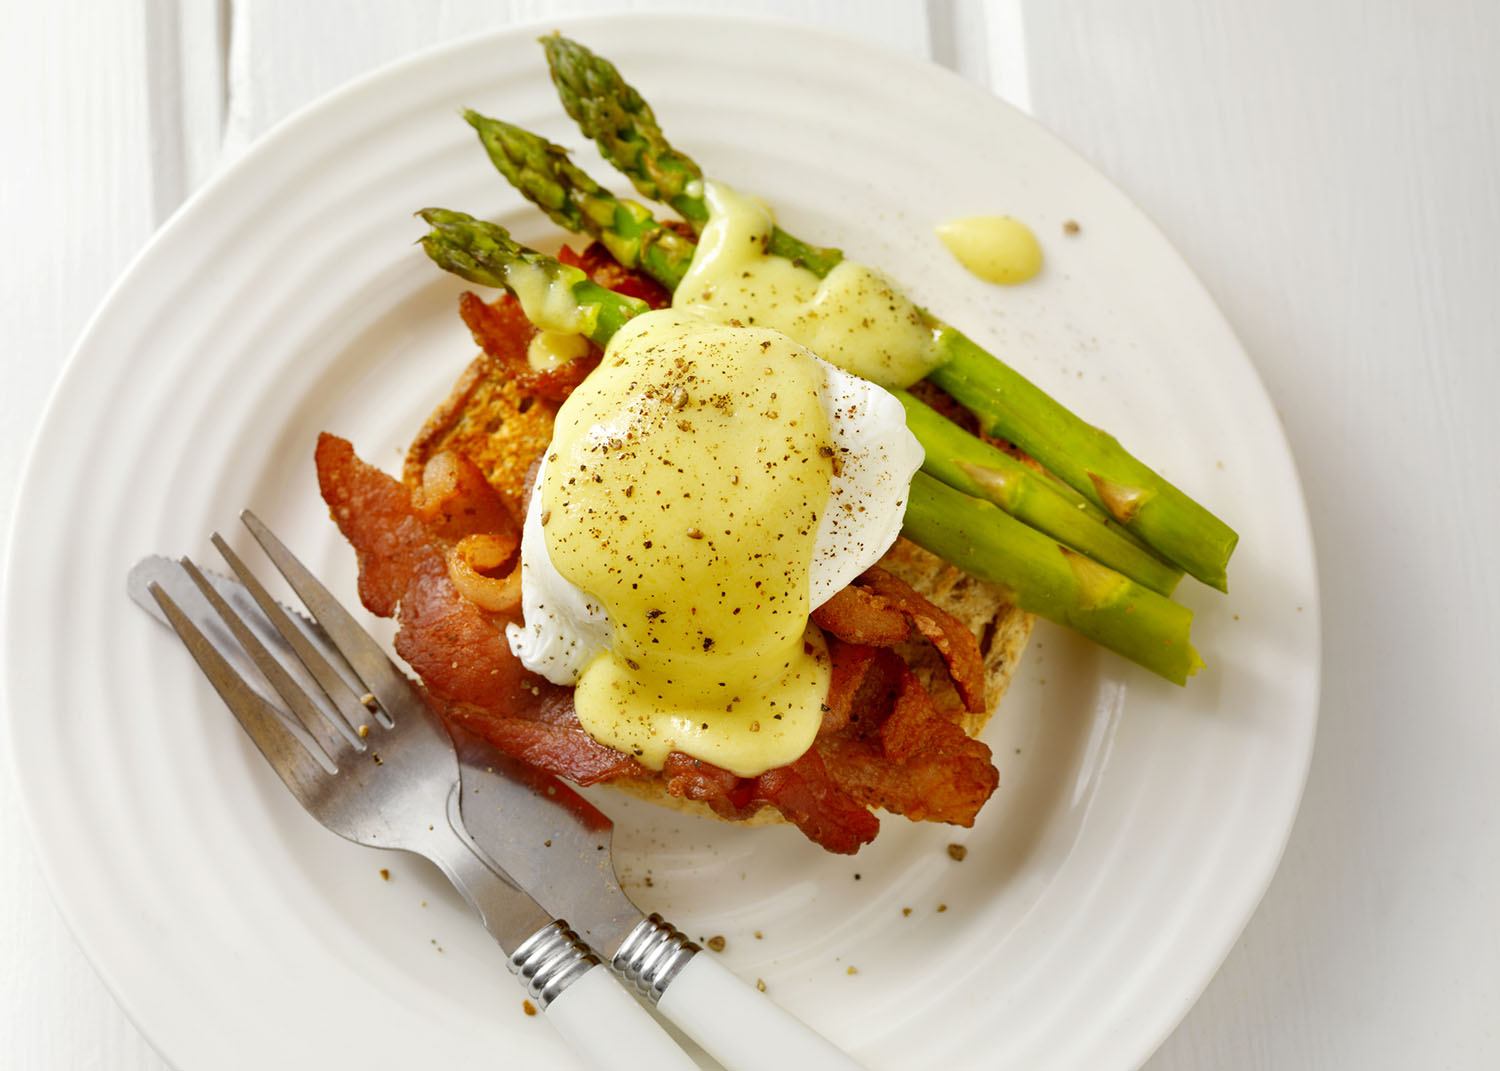 Bacon Eggs Benedict with Asparagus  -Photographed on Hasselblad H3D2-39mb Camera